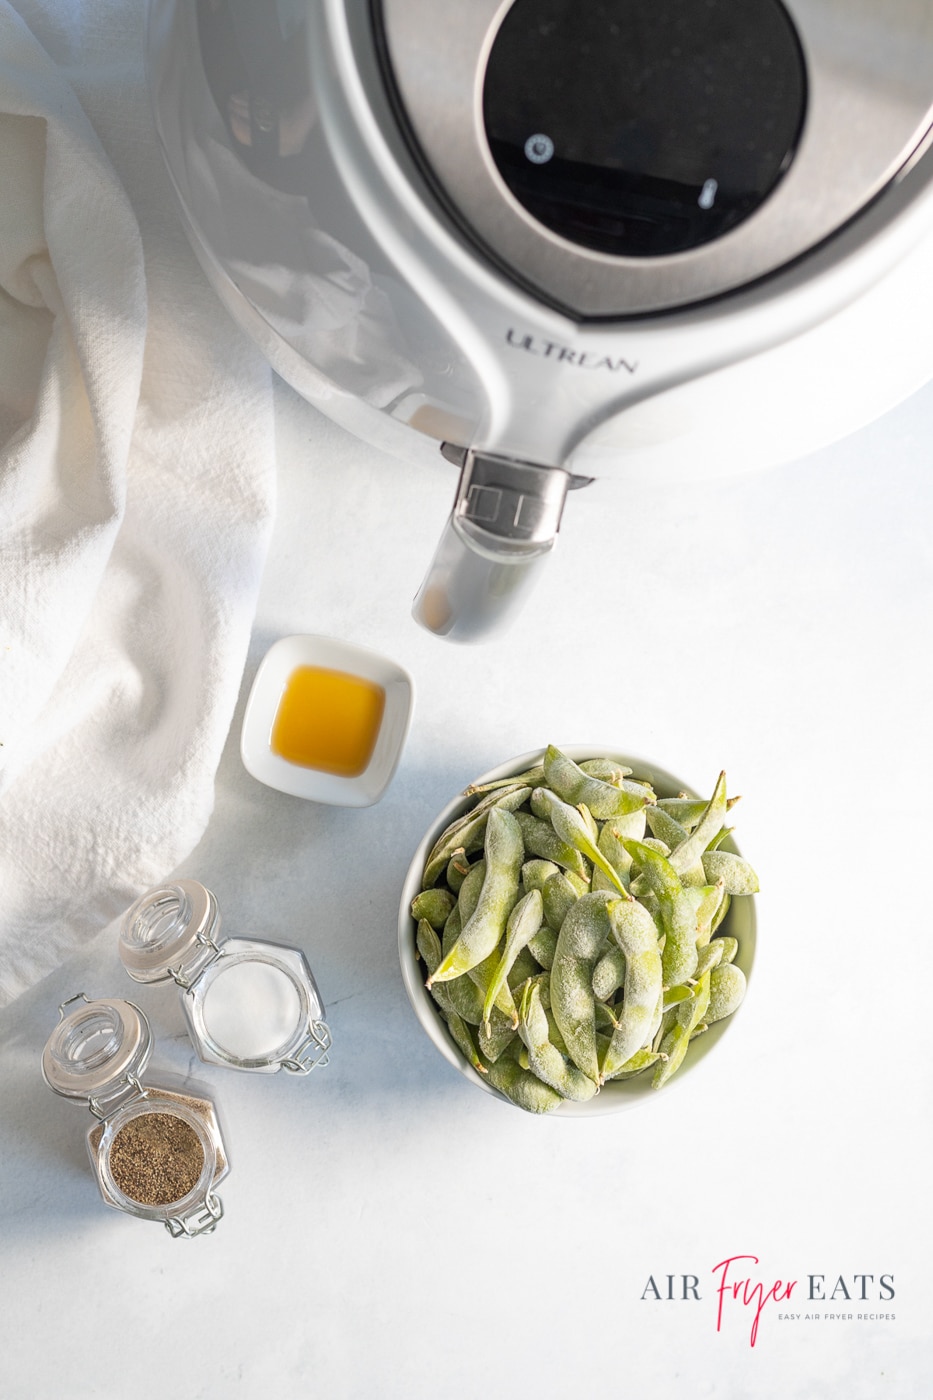 Vertical photo of ingredients required for Air Fryer Edamame. At the top of the photo is a white air fryer. There is a bowl containing frozen edamame, salt and pepper in pots and a tub containing sunflower oil. To the bottom right of the photo is the company logo